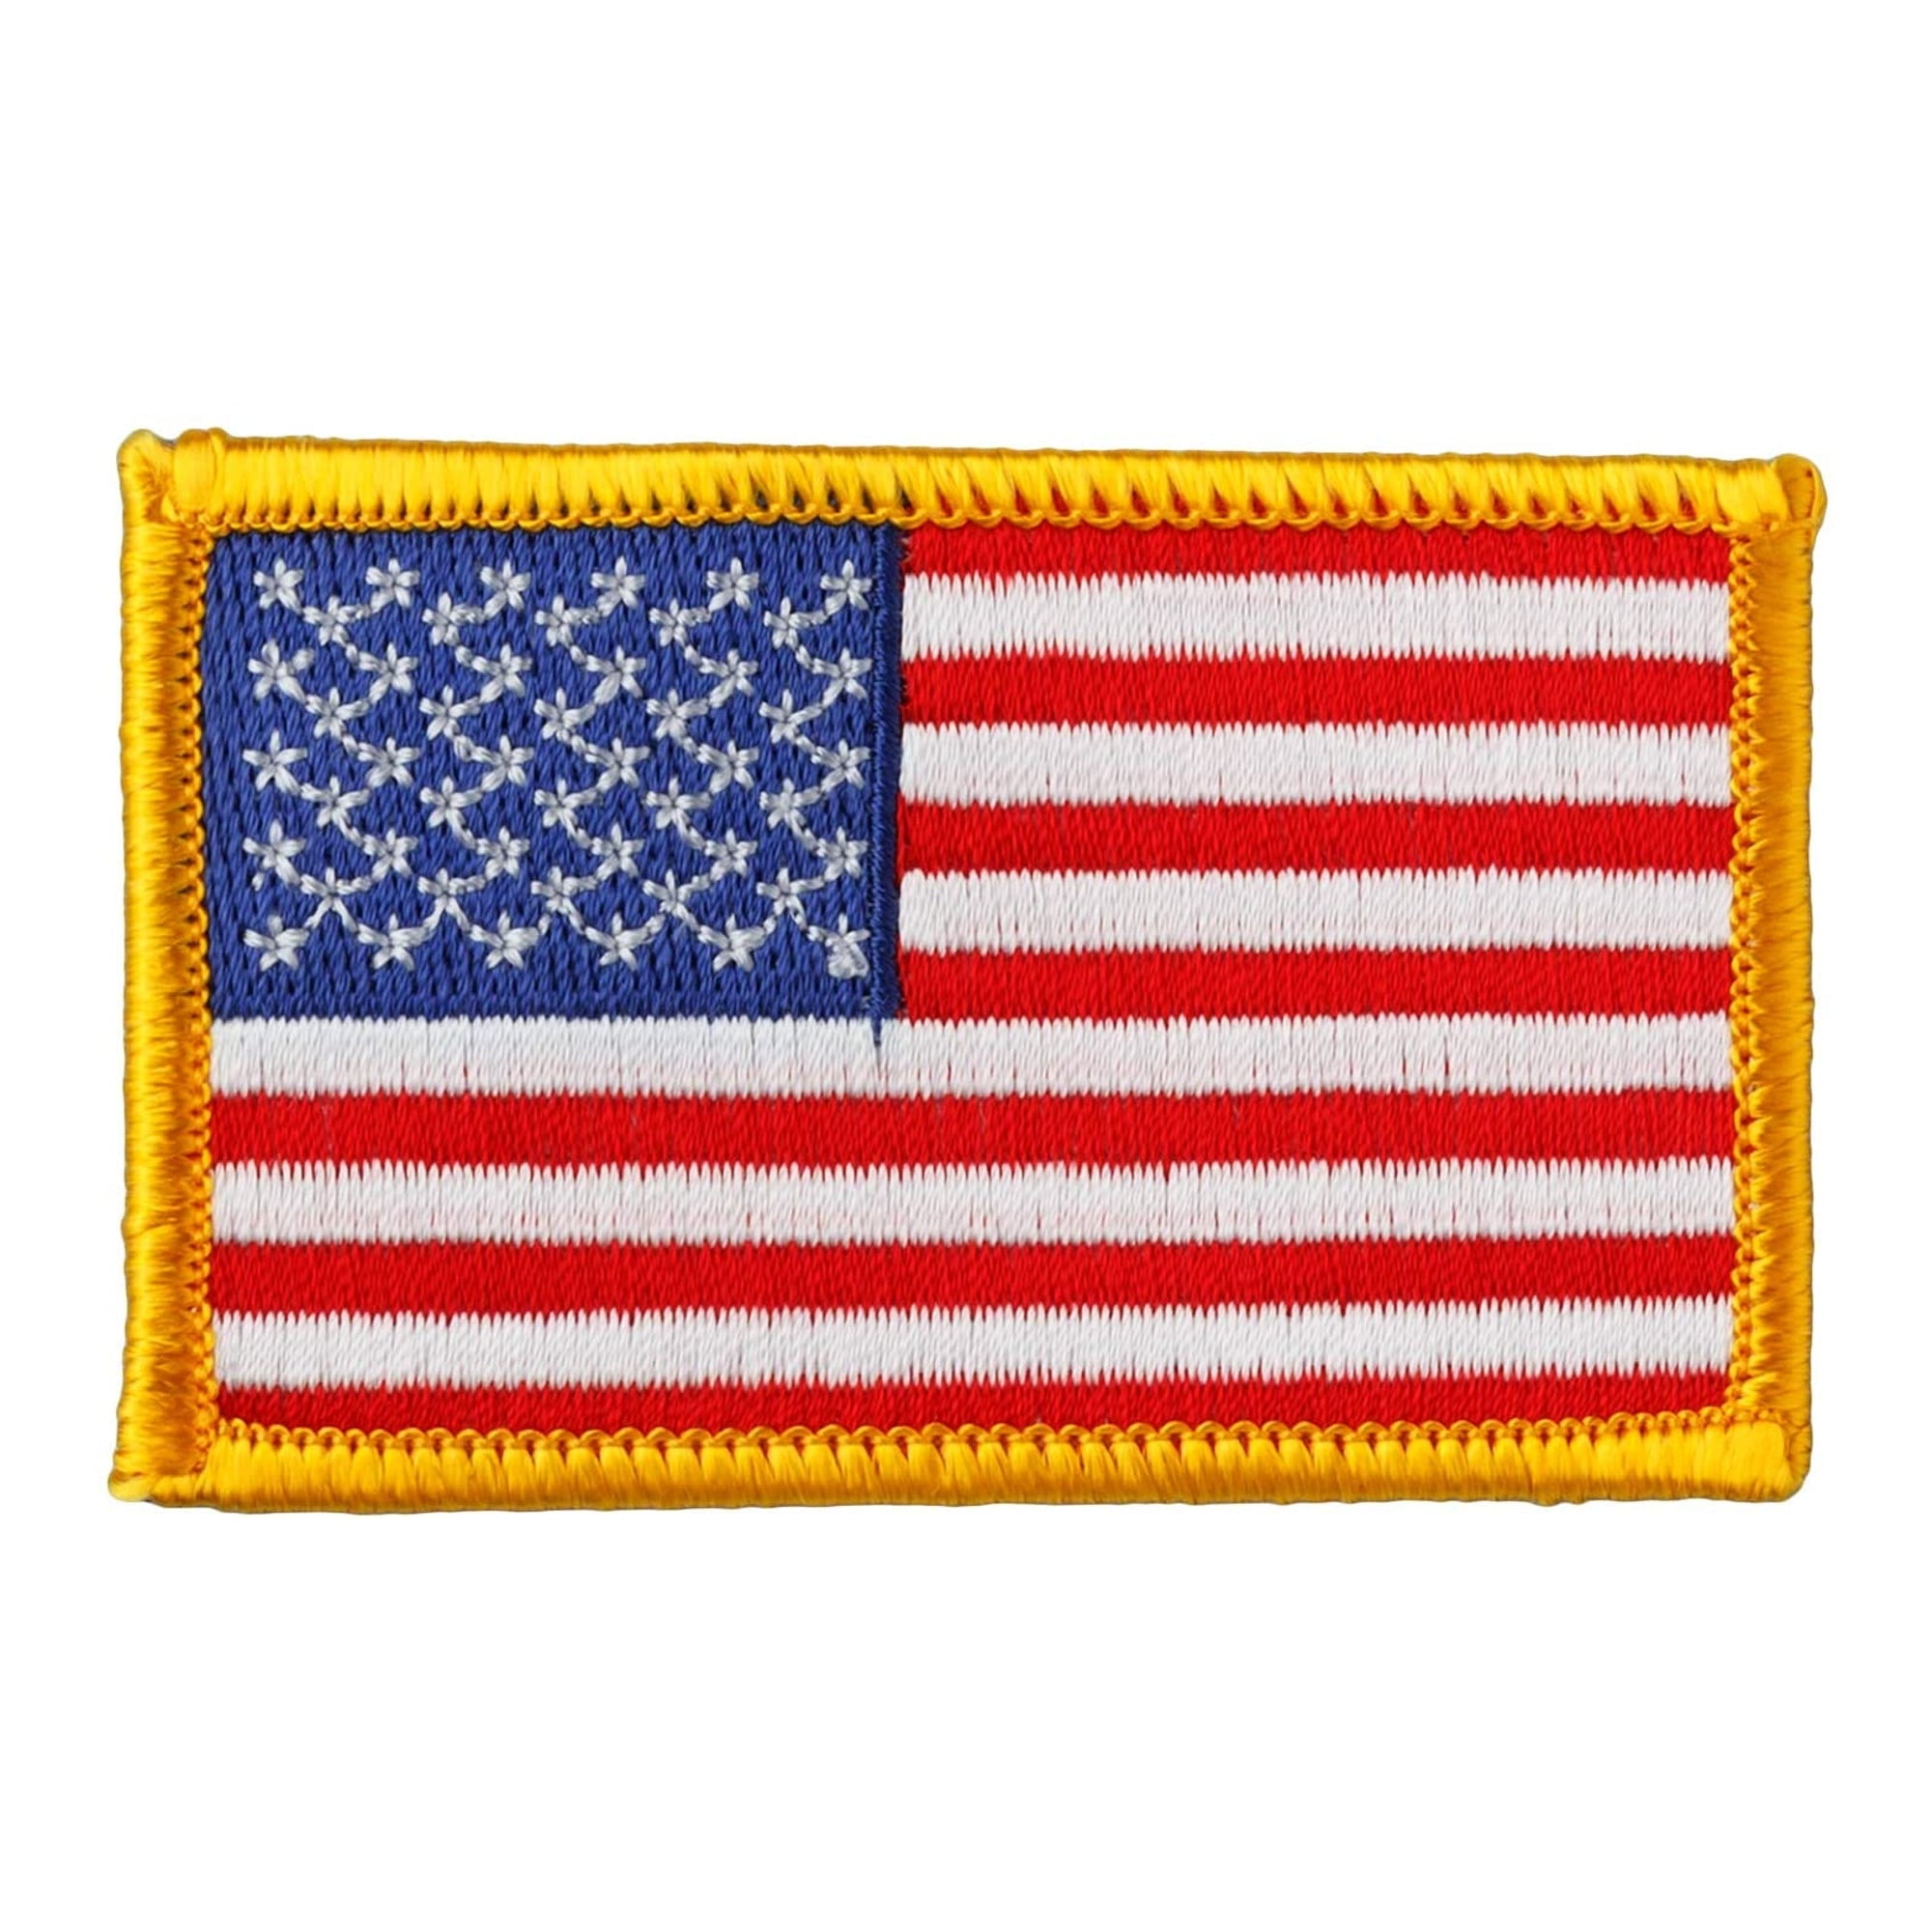 Patch badge badge embroidered printed fusible flag usa united states american 